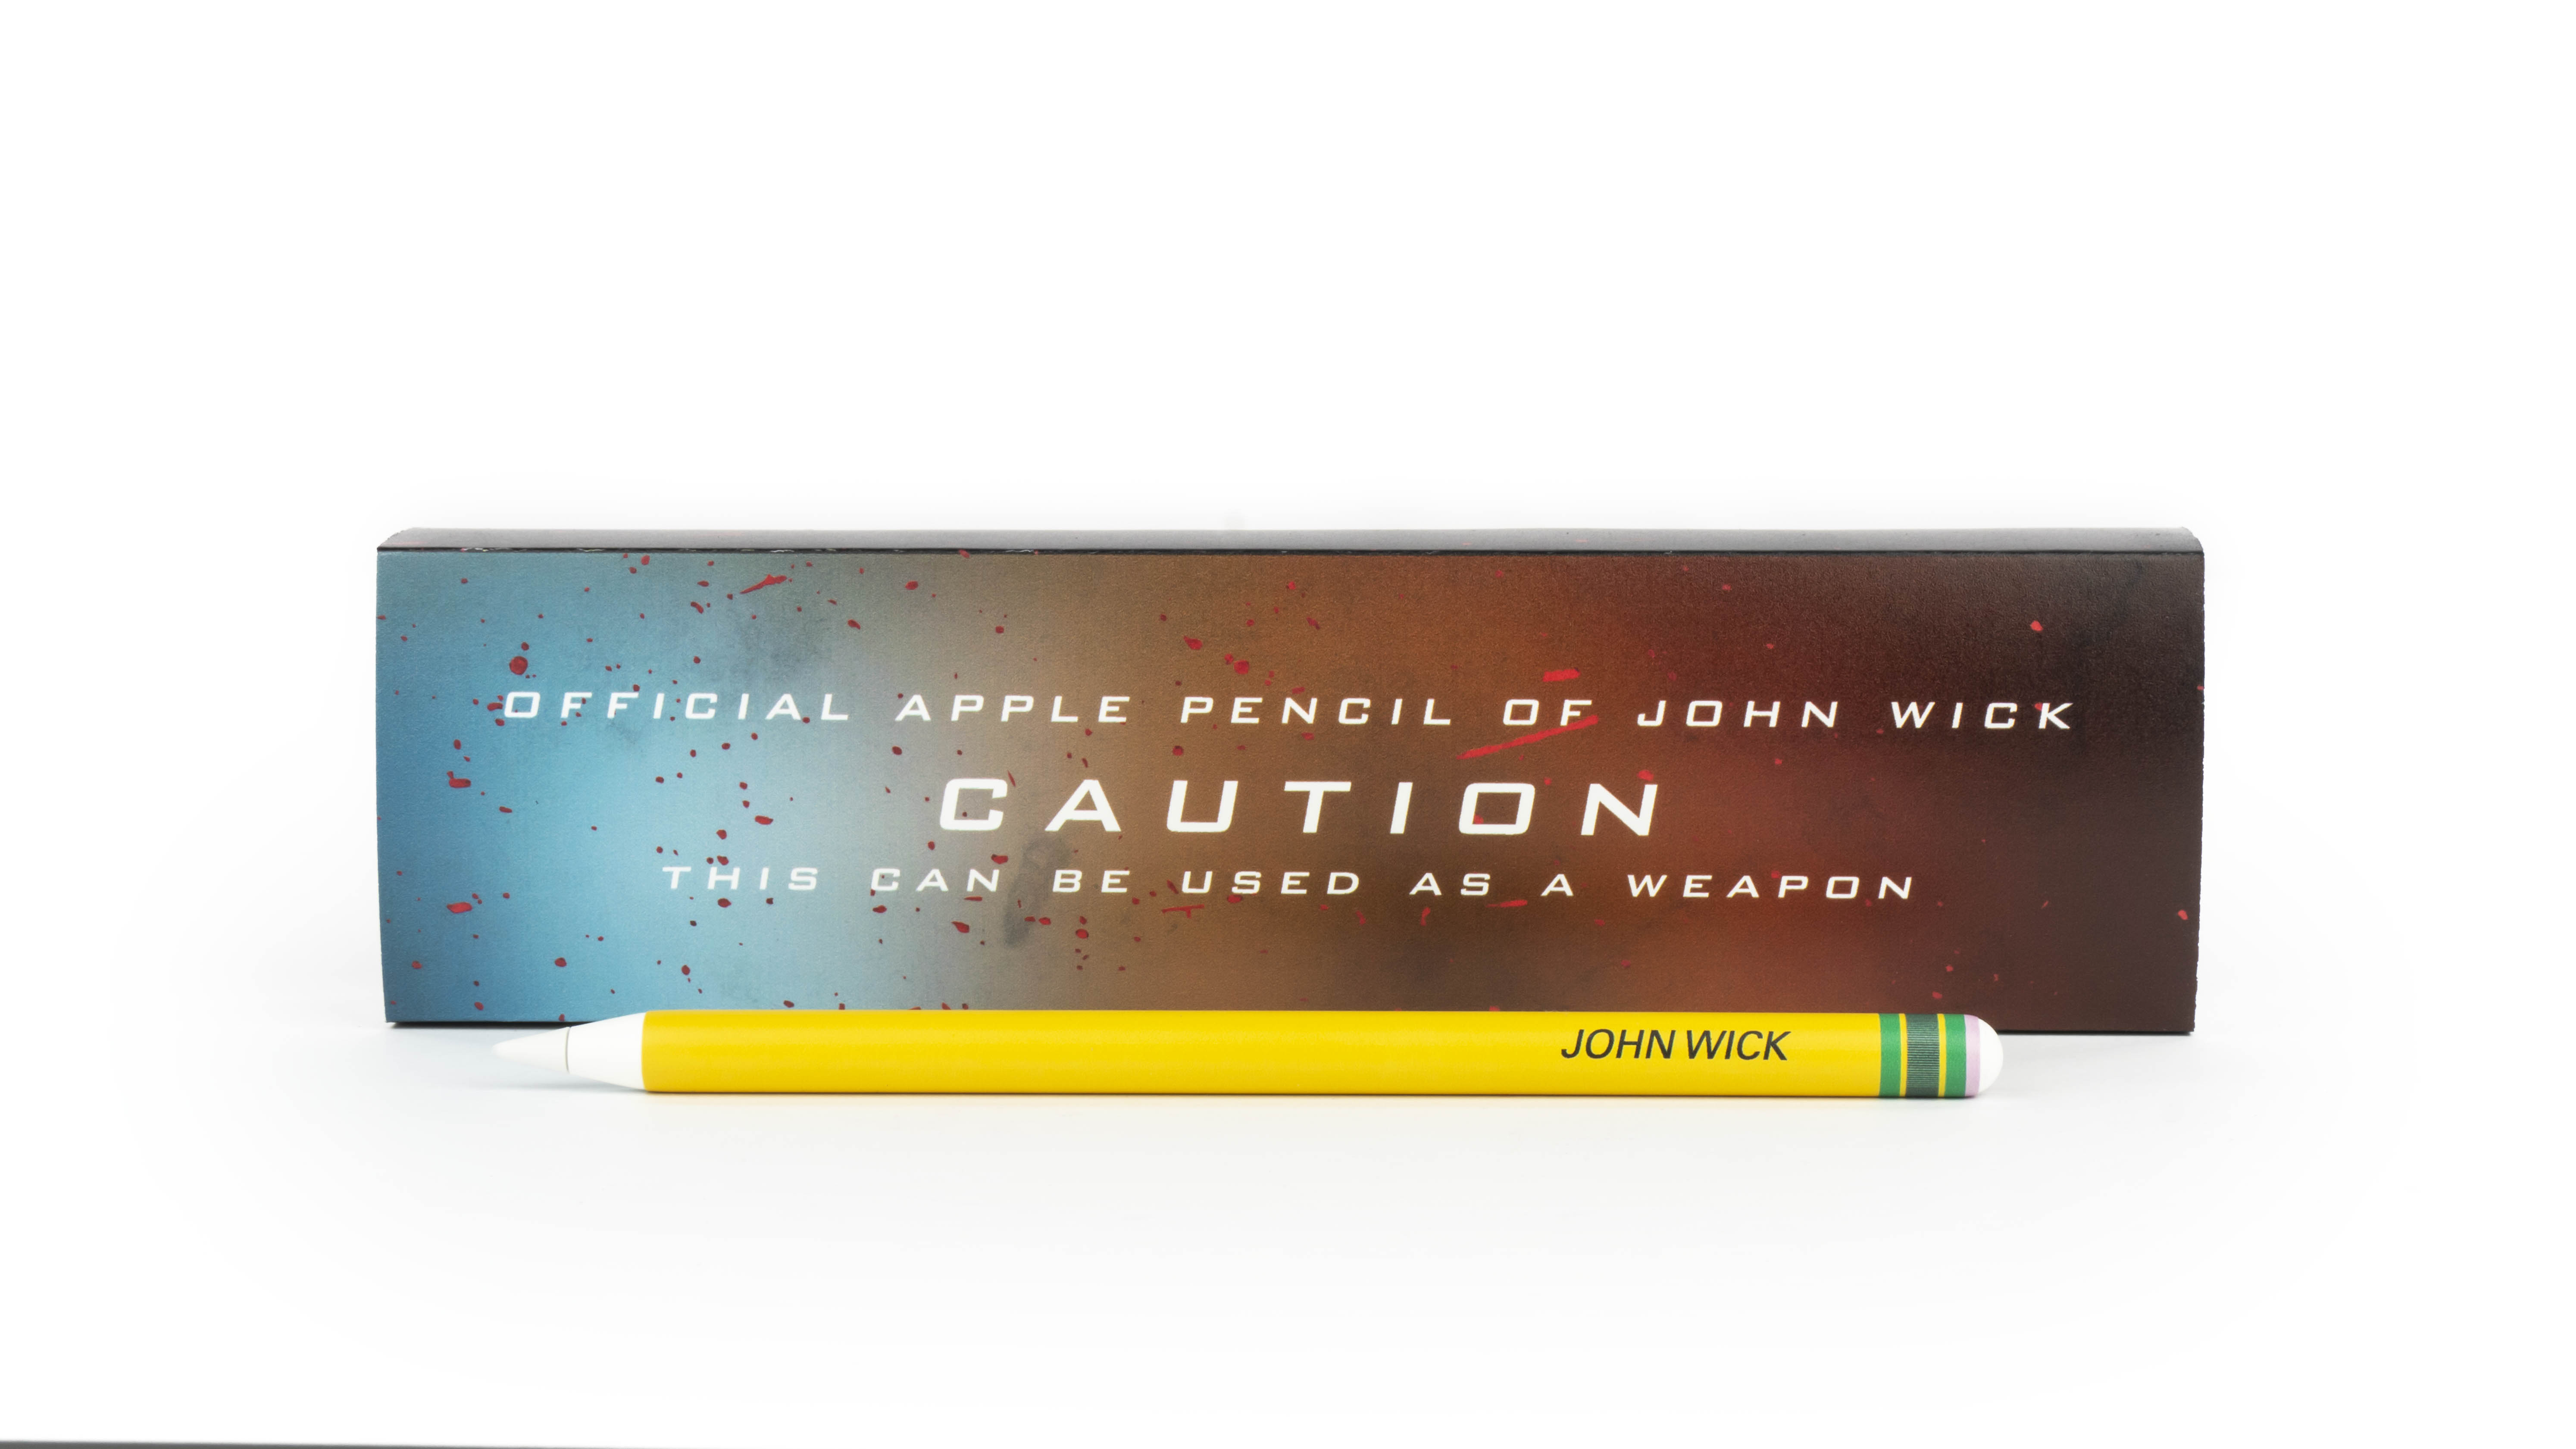 The customized Apple Pencil is a replica of the gruesome tool as seen in the film.